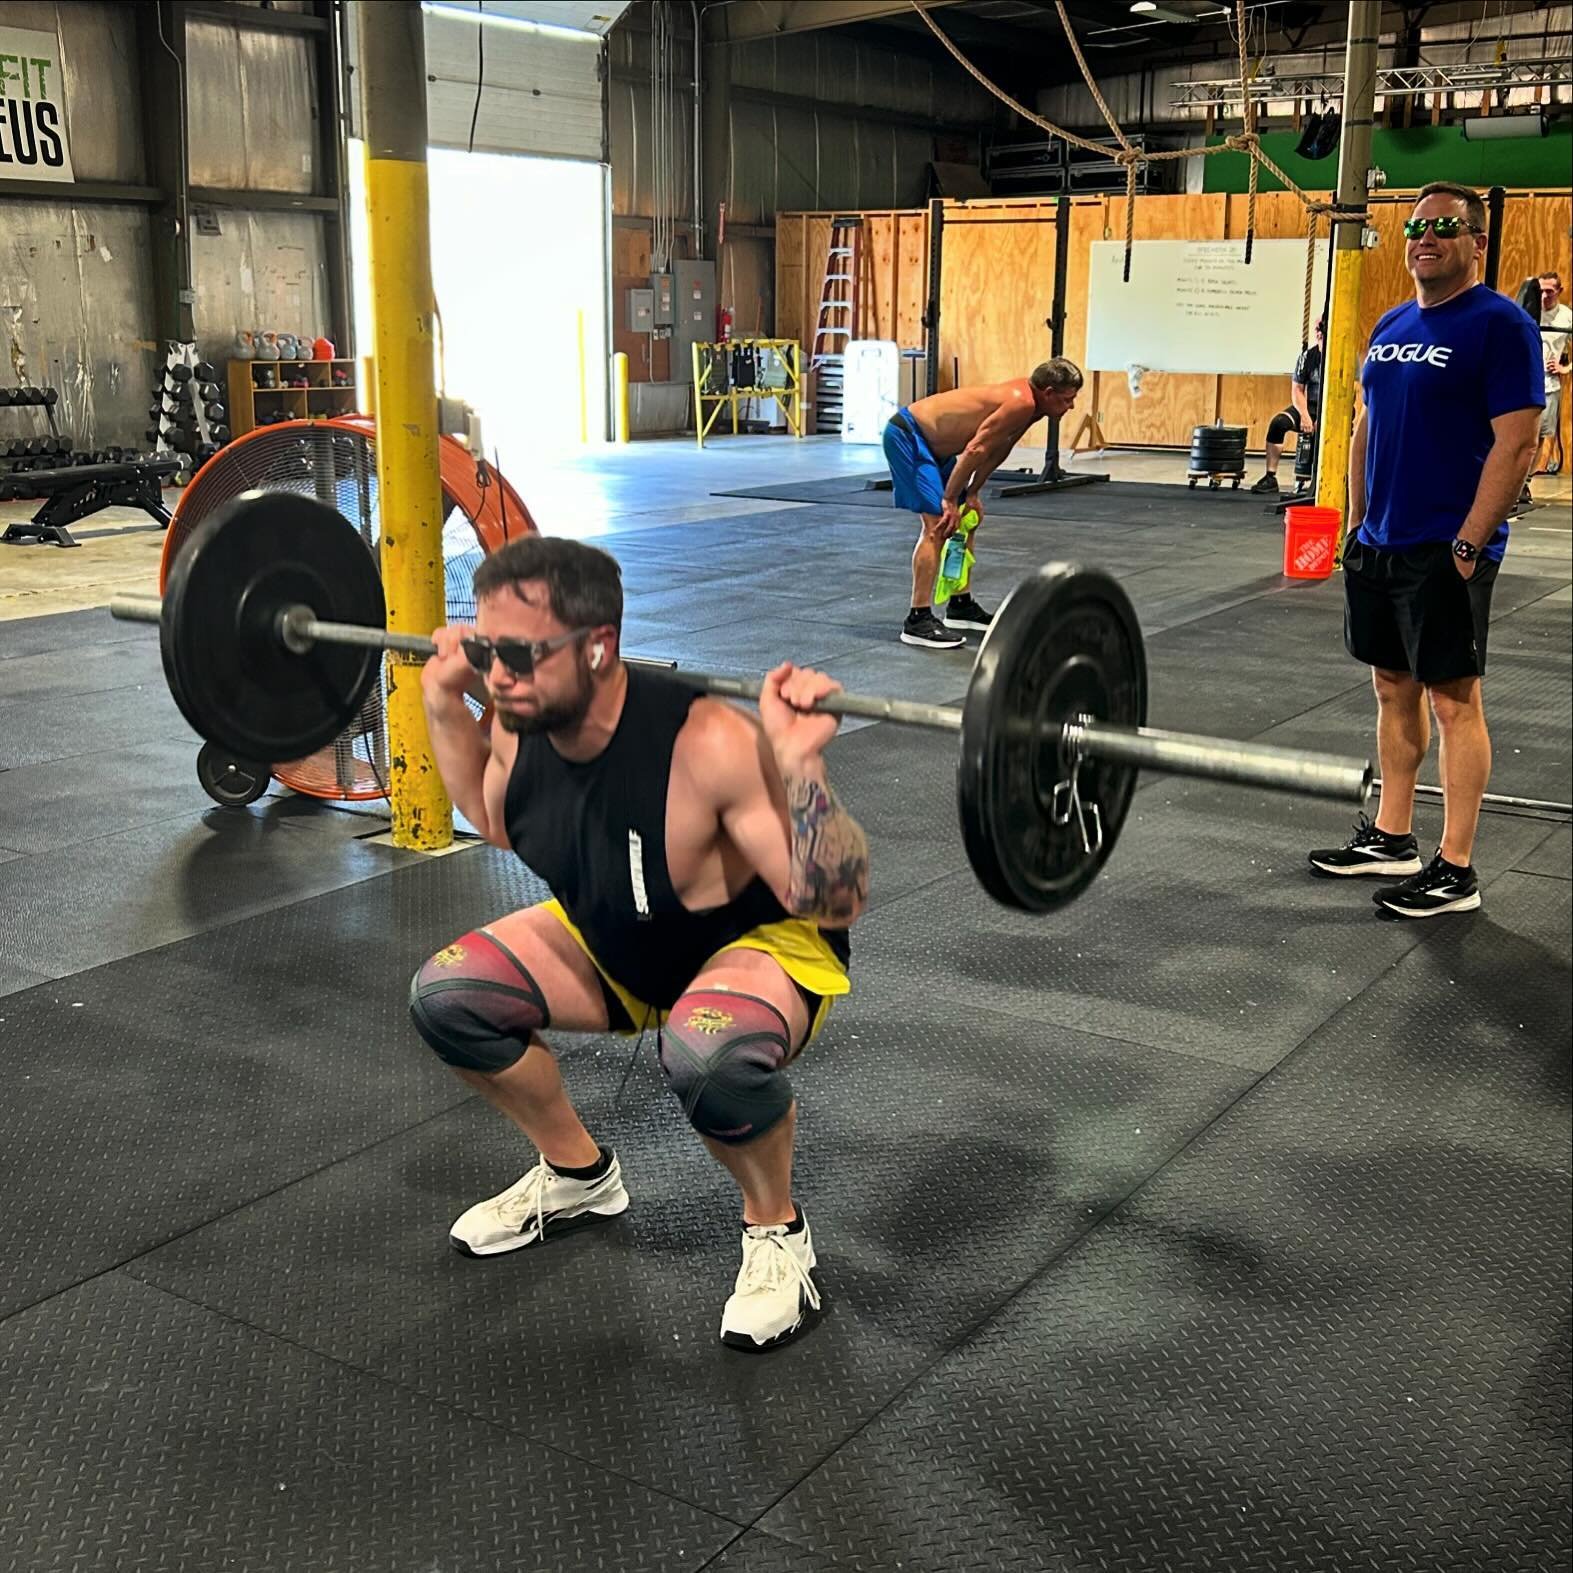 When you&rsquo;re crushing the workout so much 🔥 that your entourage wants to be just like you! 😎

Want to find your people, your safe space, and experience the best hour of your day? Then come join us at CrossFit Rohkeus!

Email info@crossfitrohke